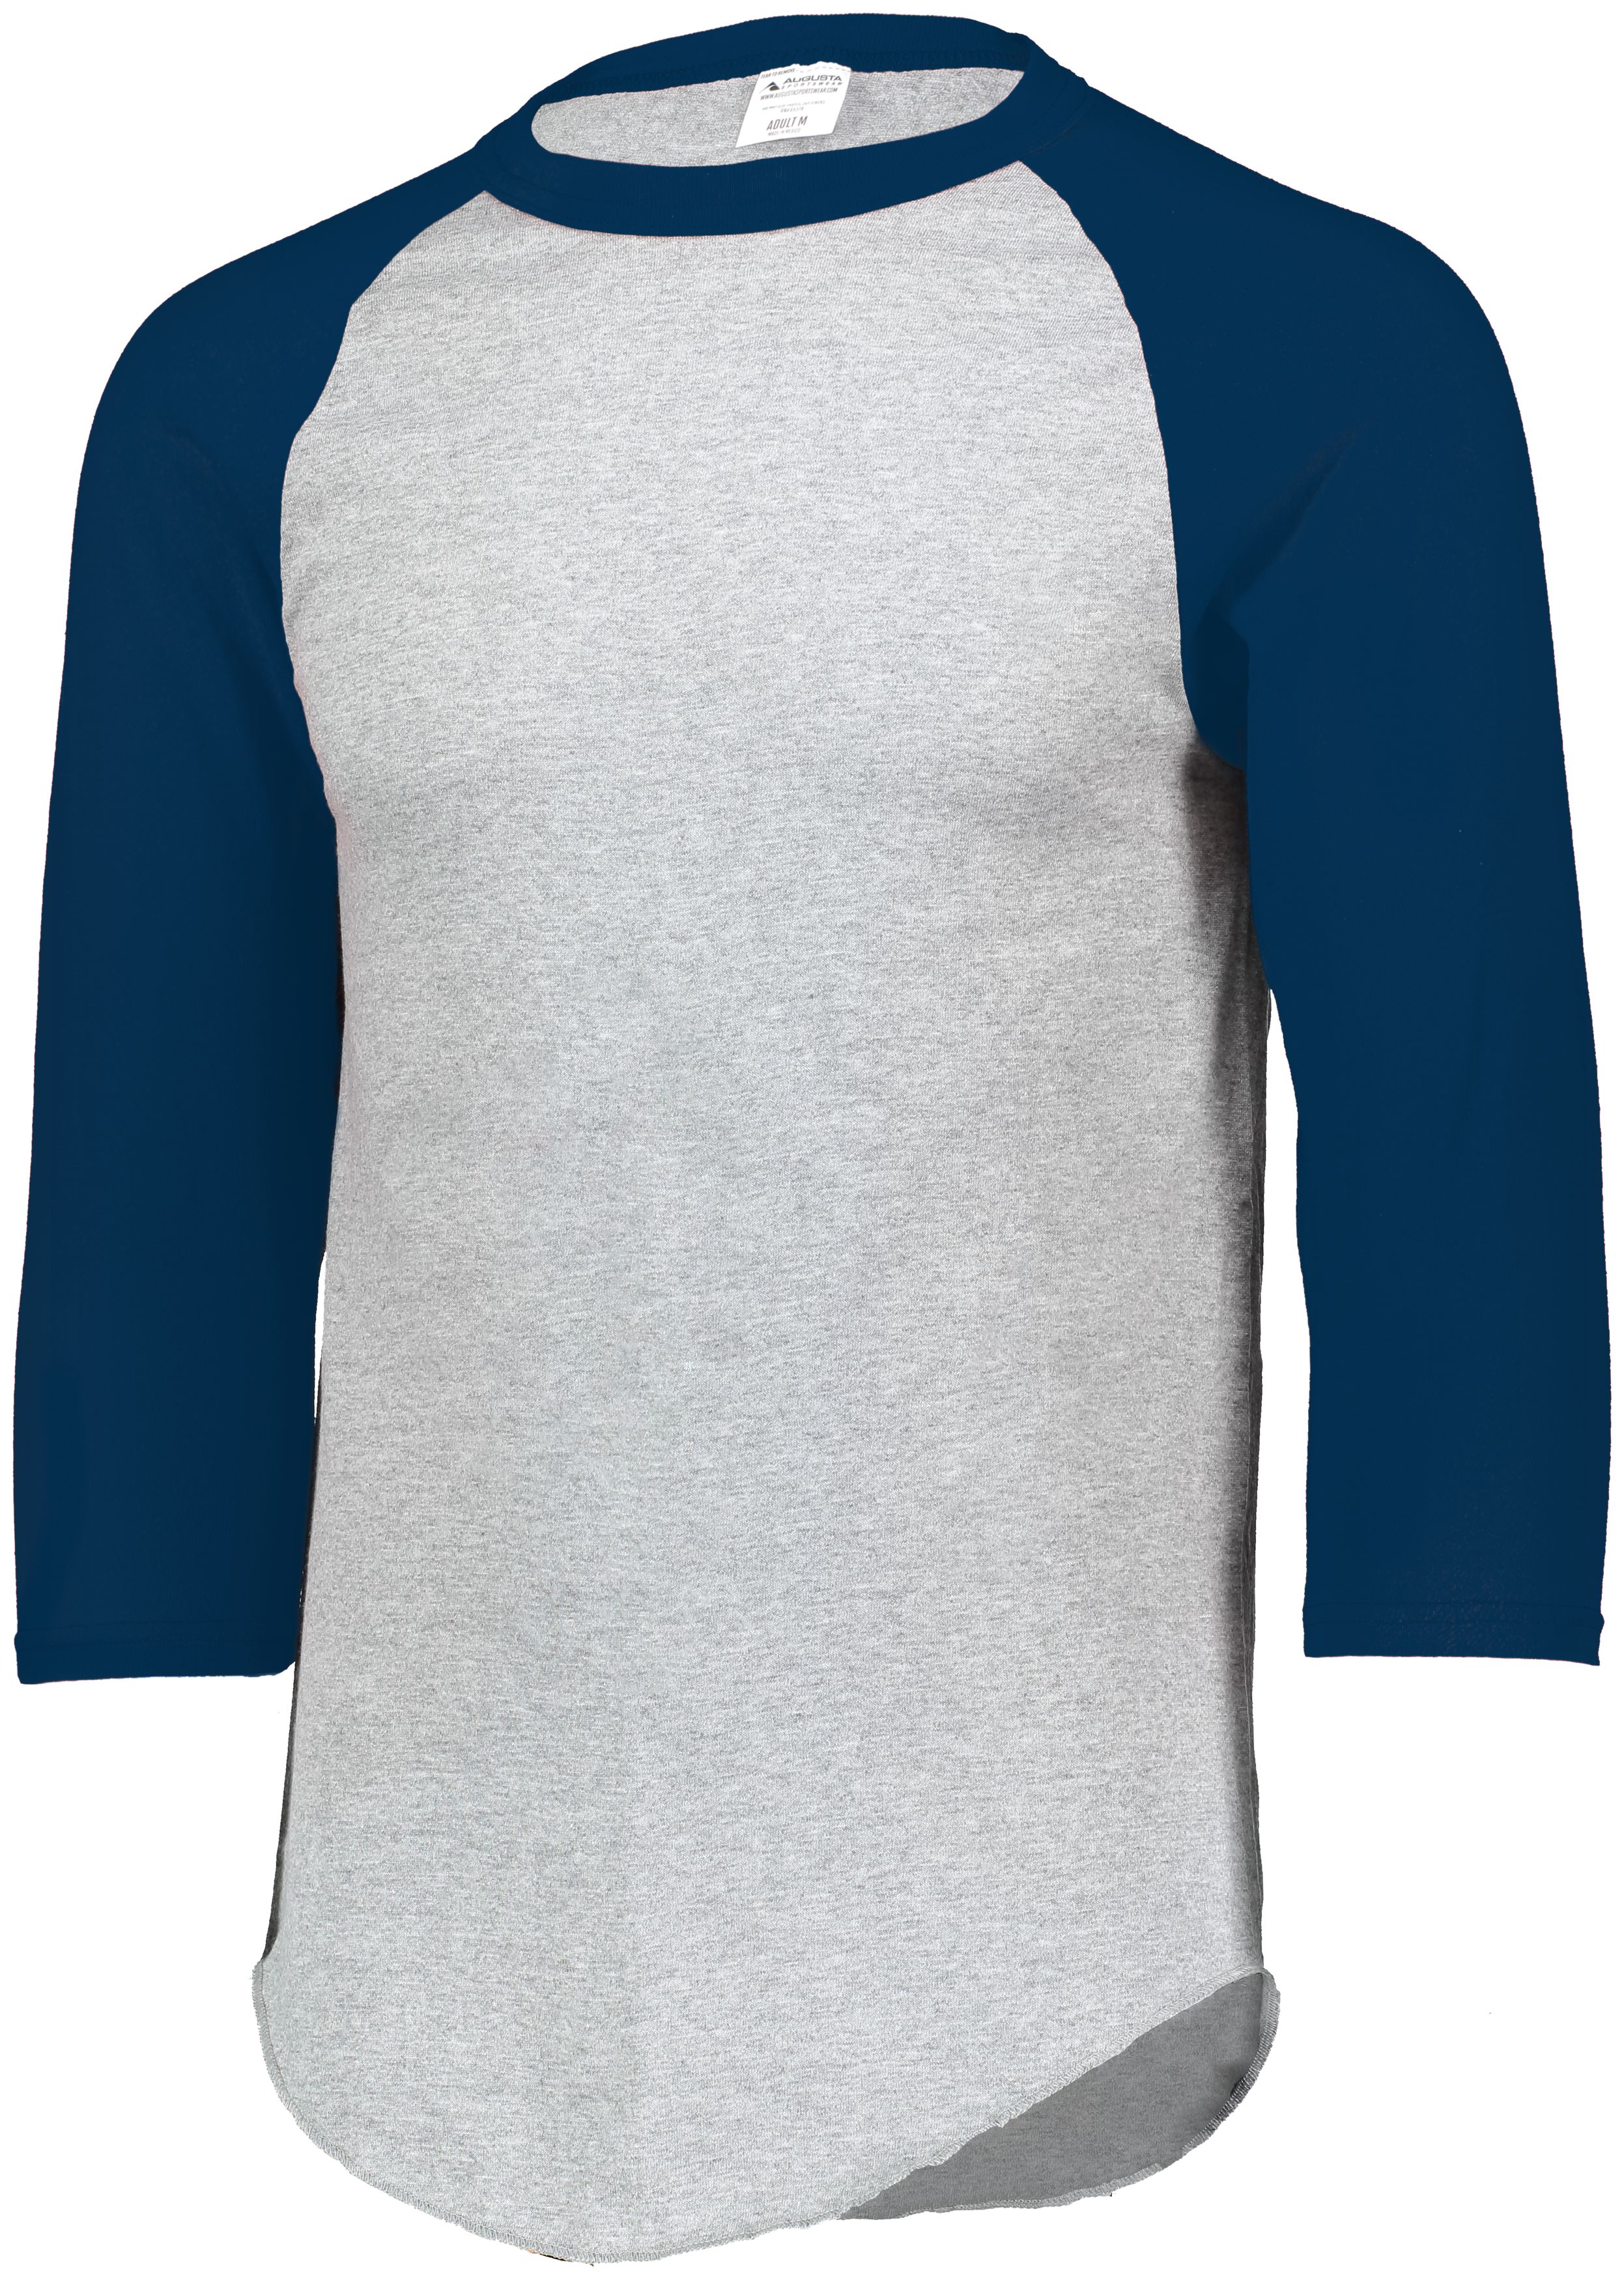 Multi-color/Athletic Heather/Navy